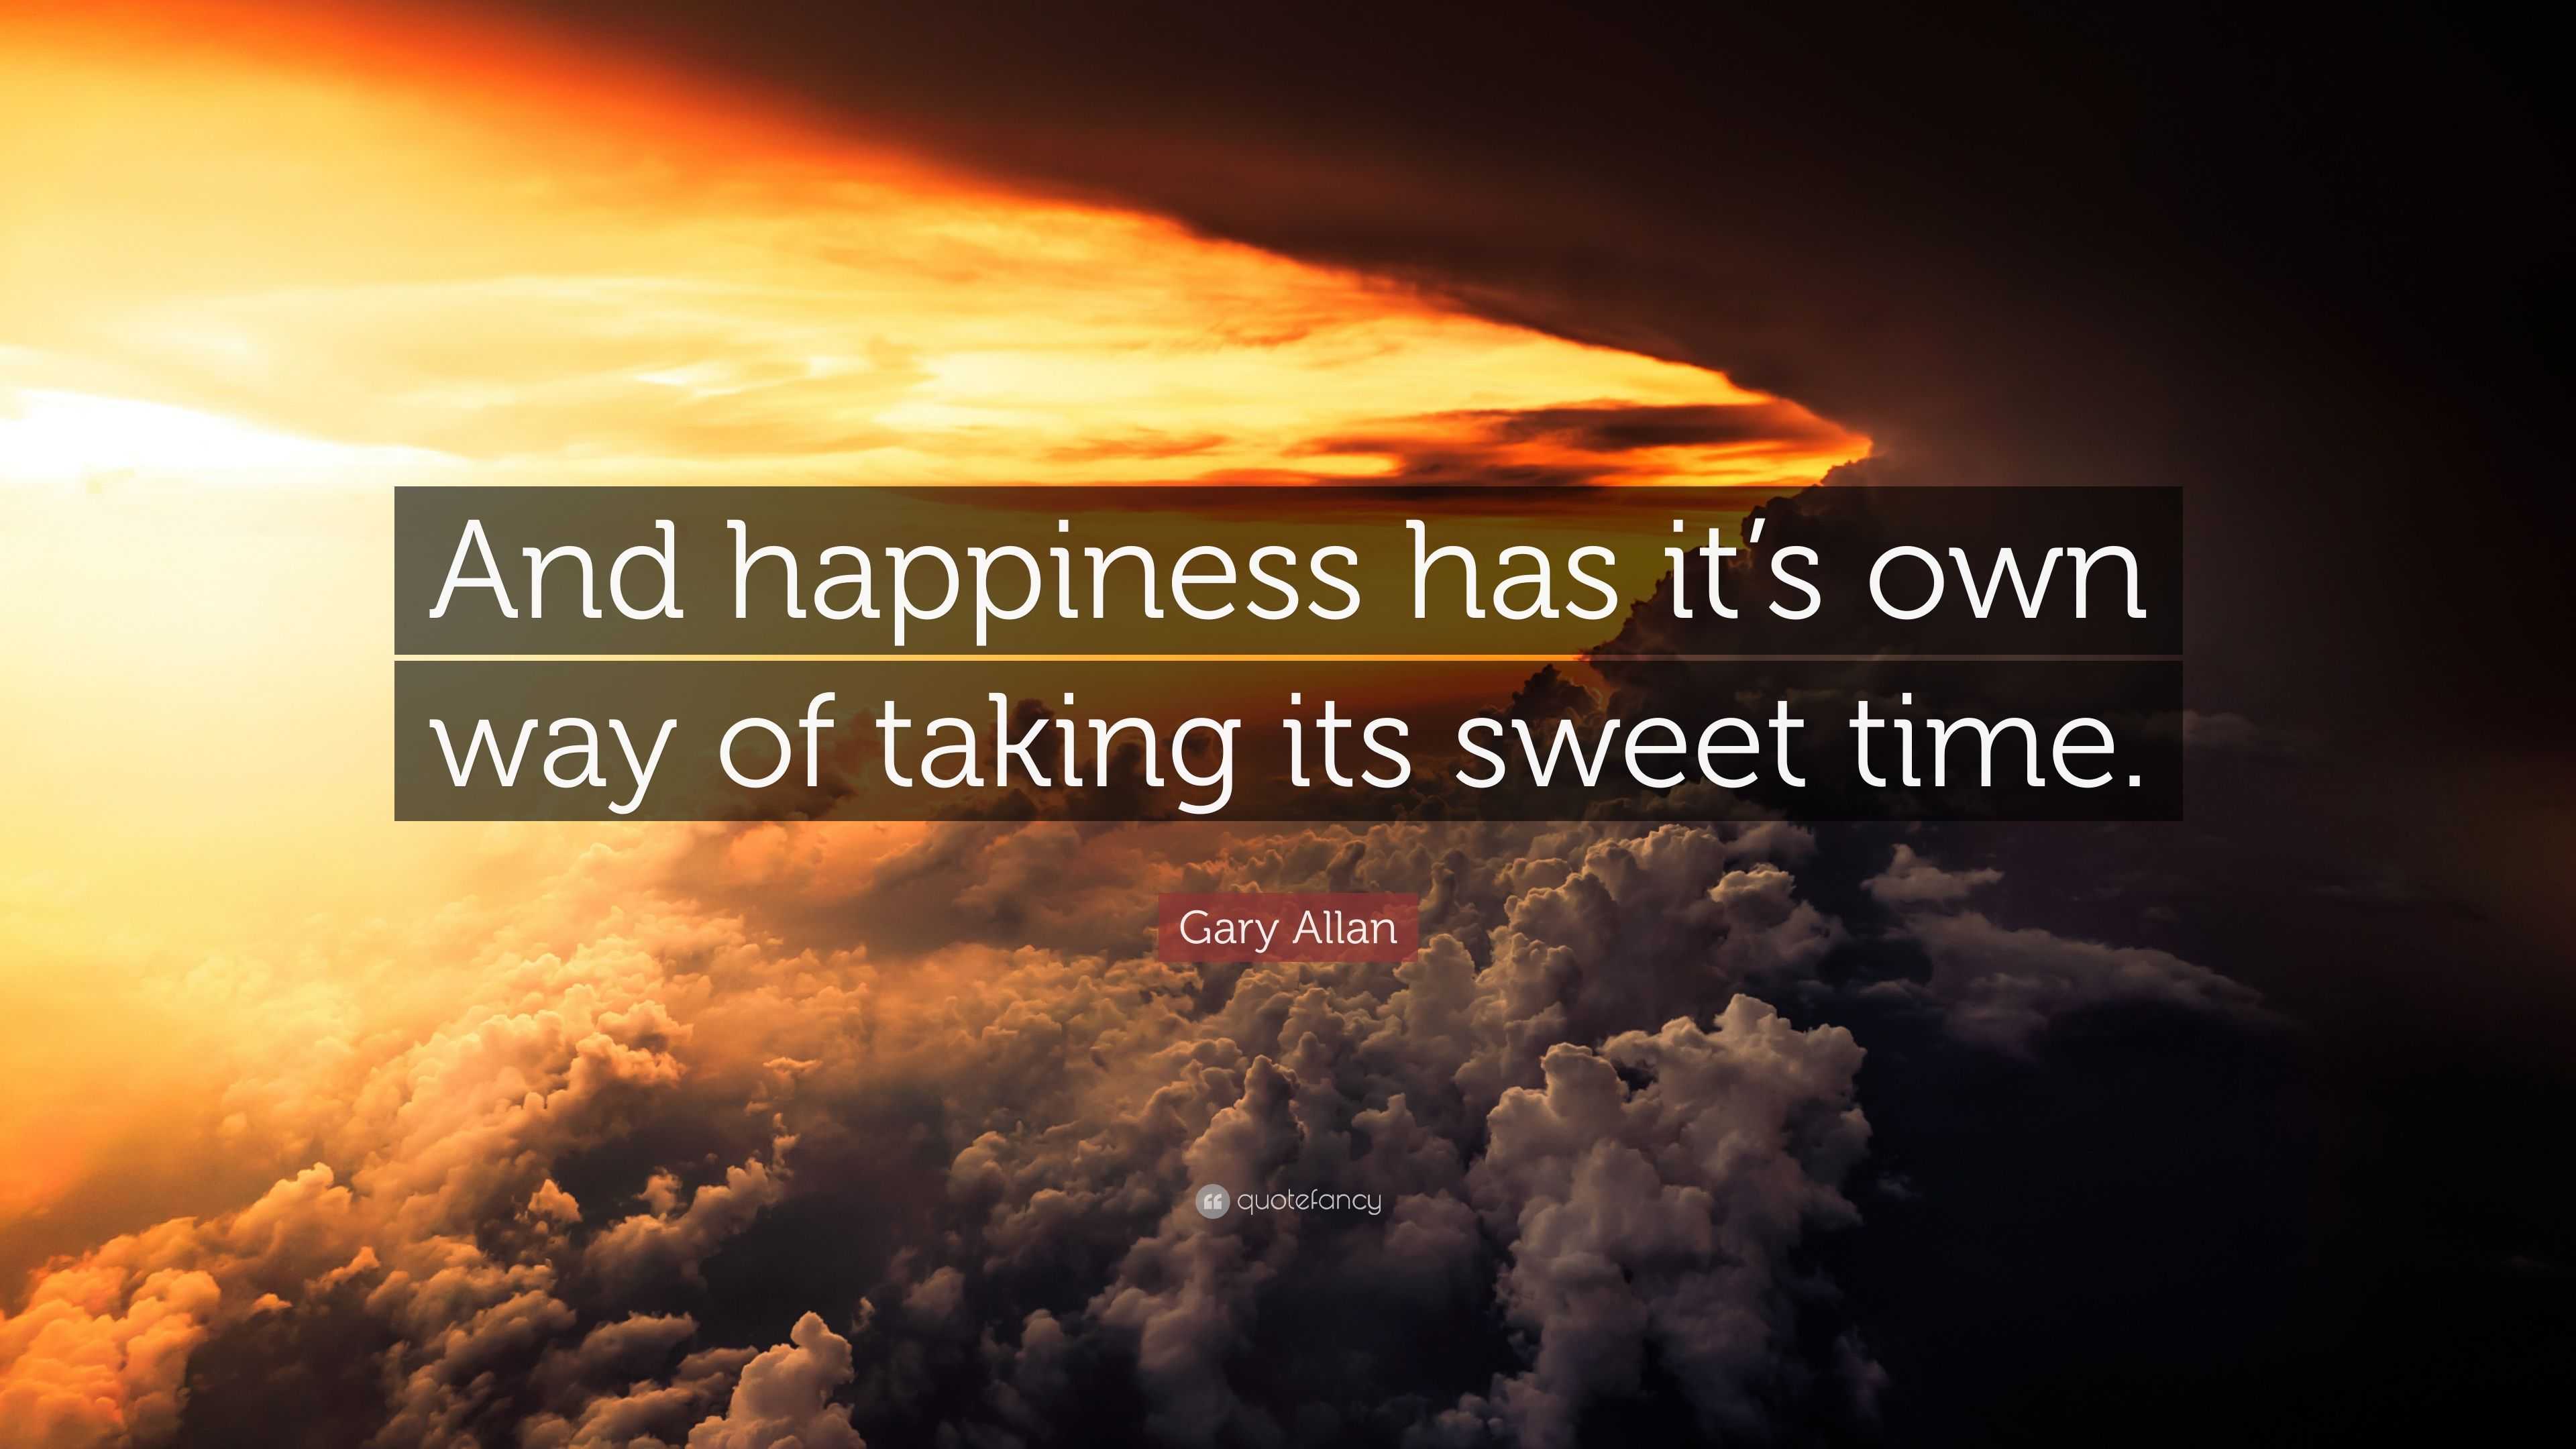 Quote: “And happiness has own way of taking its sweet time.”